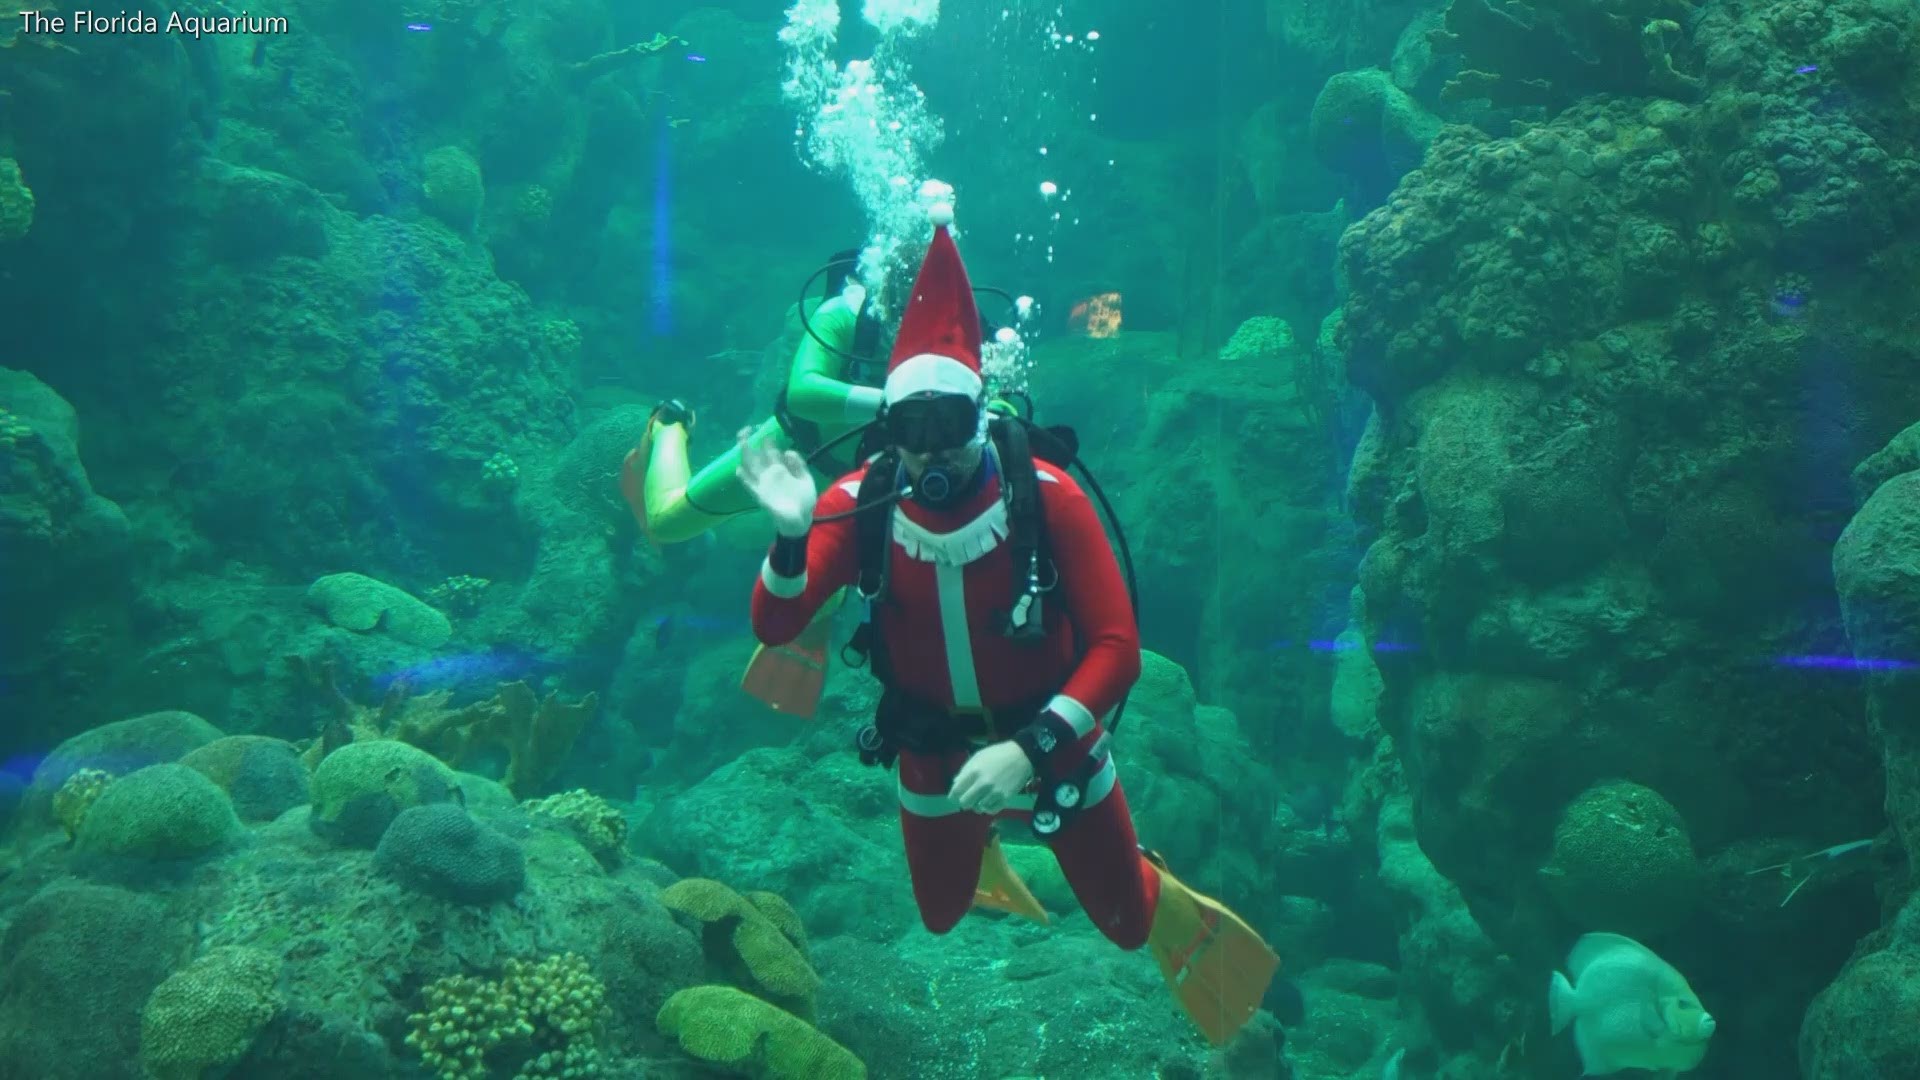 Santa Claus made his first stop in Tampa for the holidays and decided to take a dive at the Florida Aquarium!